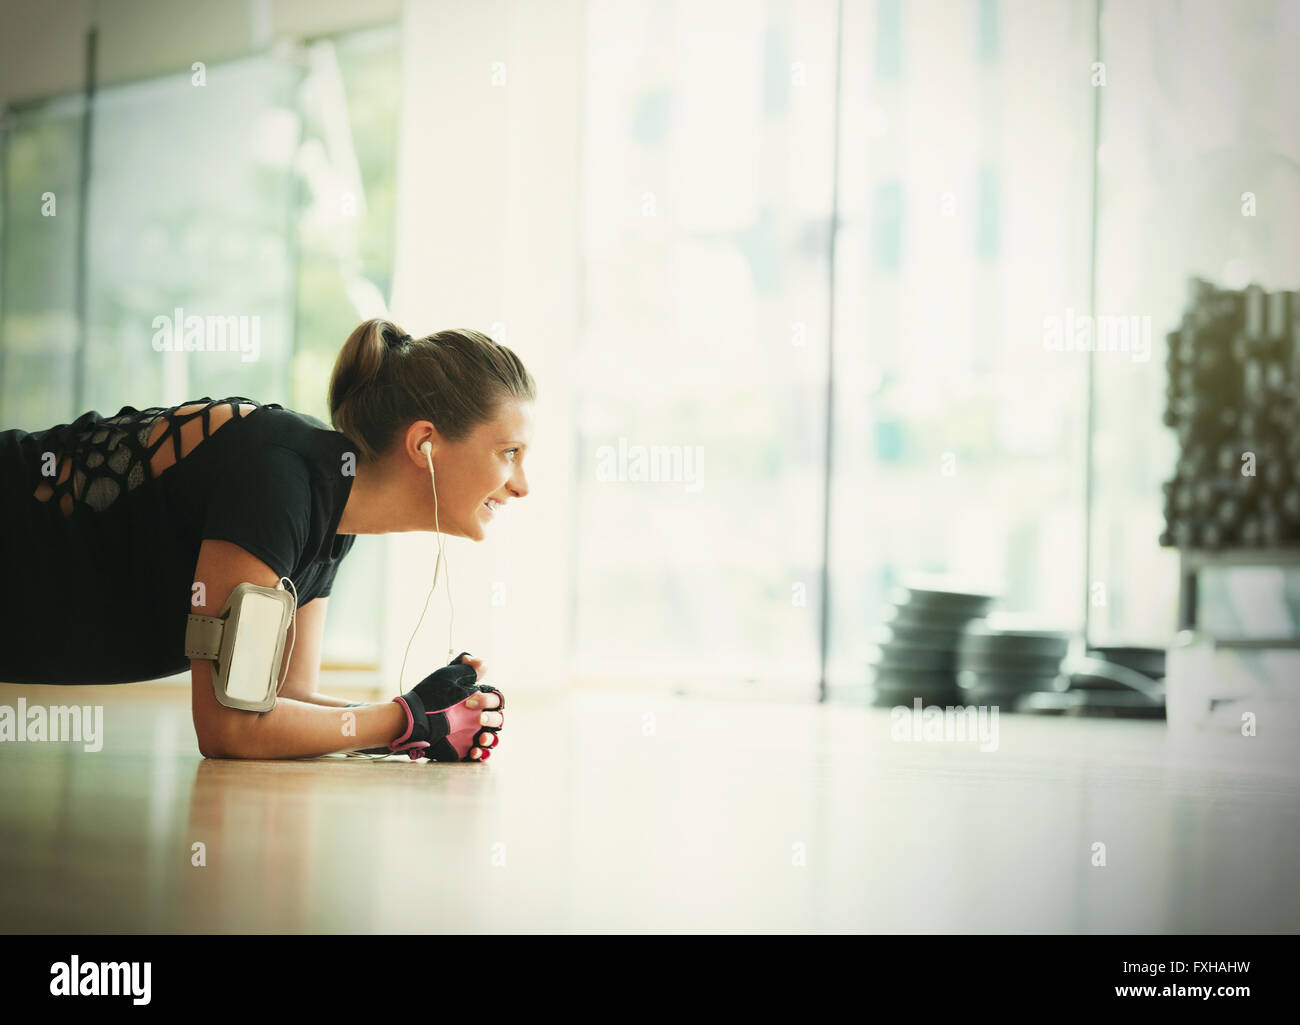 Smiling woman in plank position on gym studio floor Stock Photo